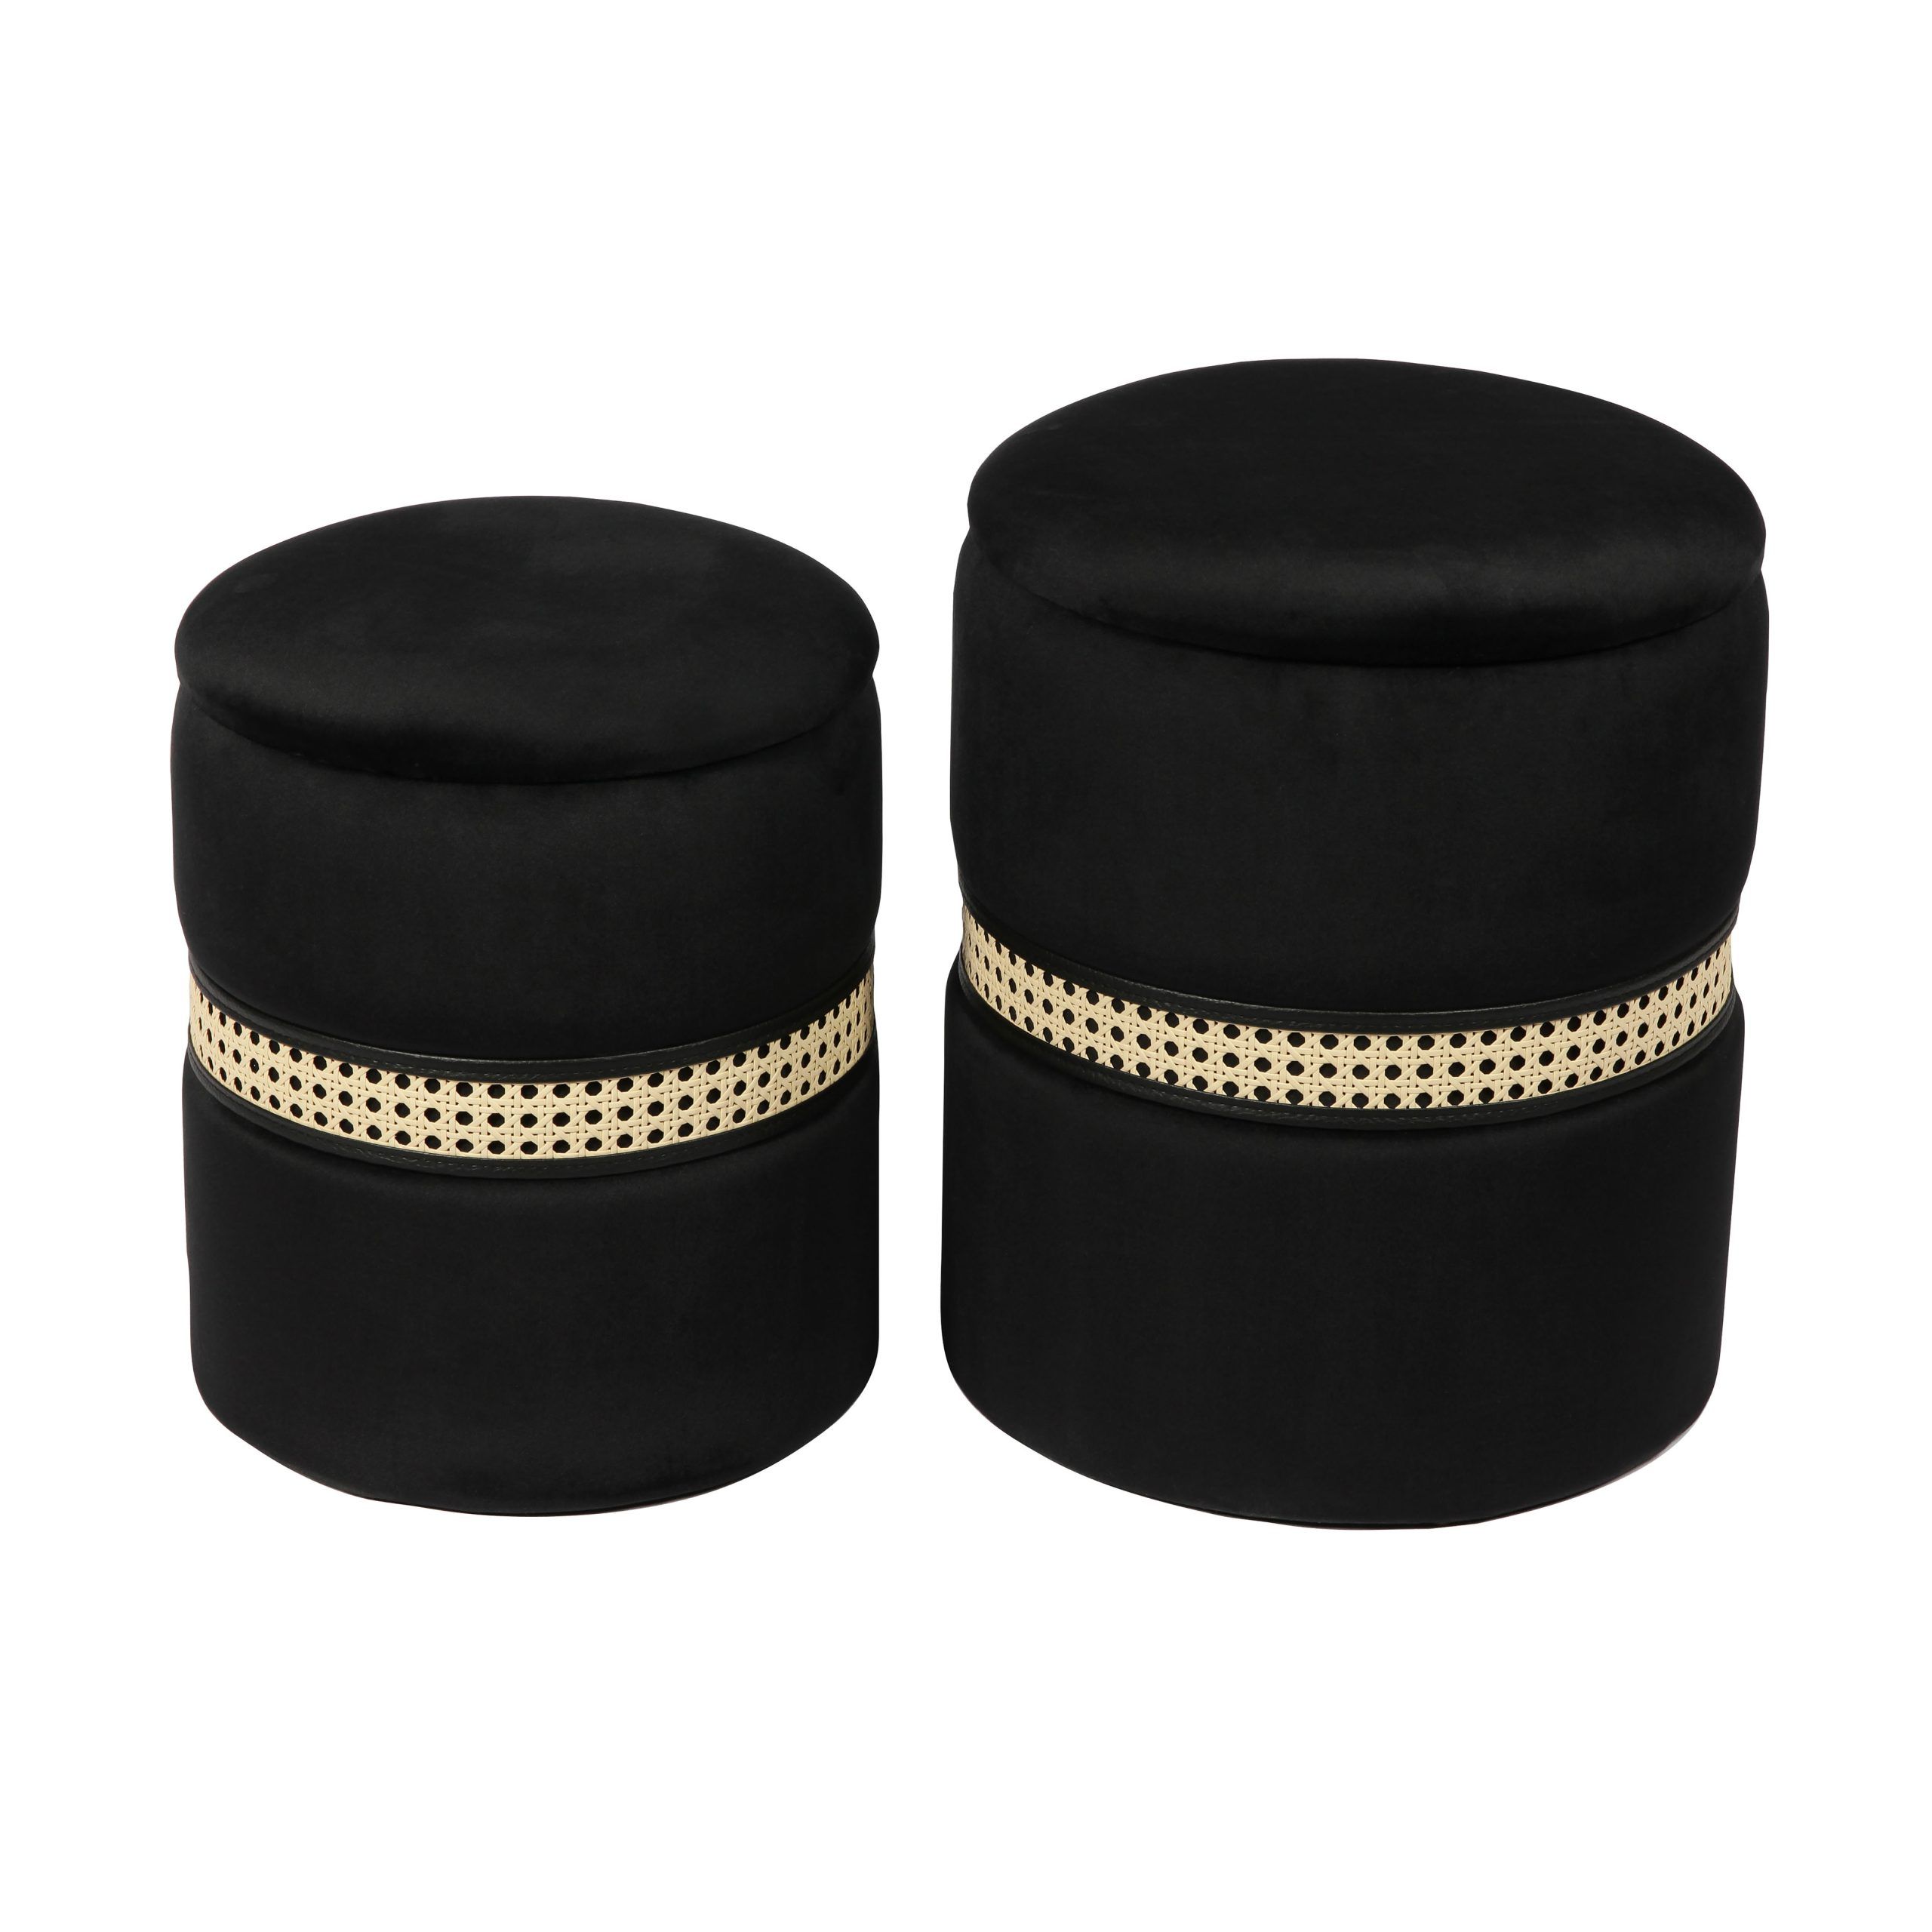 Nesting Ottomans Set Of 2 For Current Alani Black Velvet Nesting Ottomans – Set Of 2 – Tov Furniture (View 7 of 15)